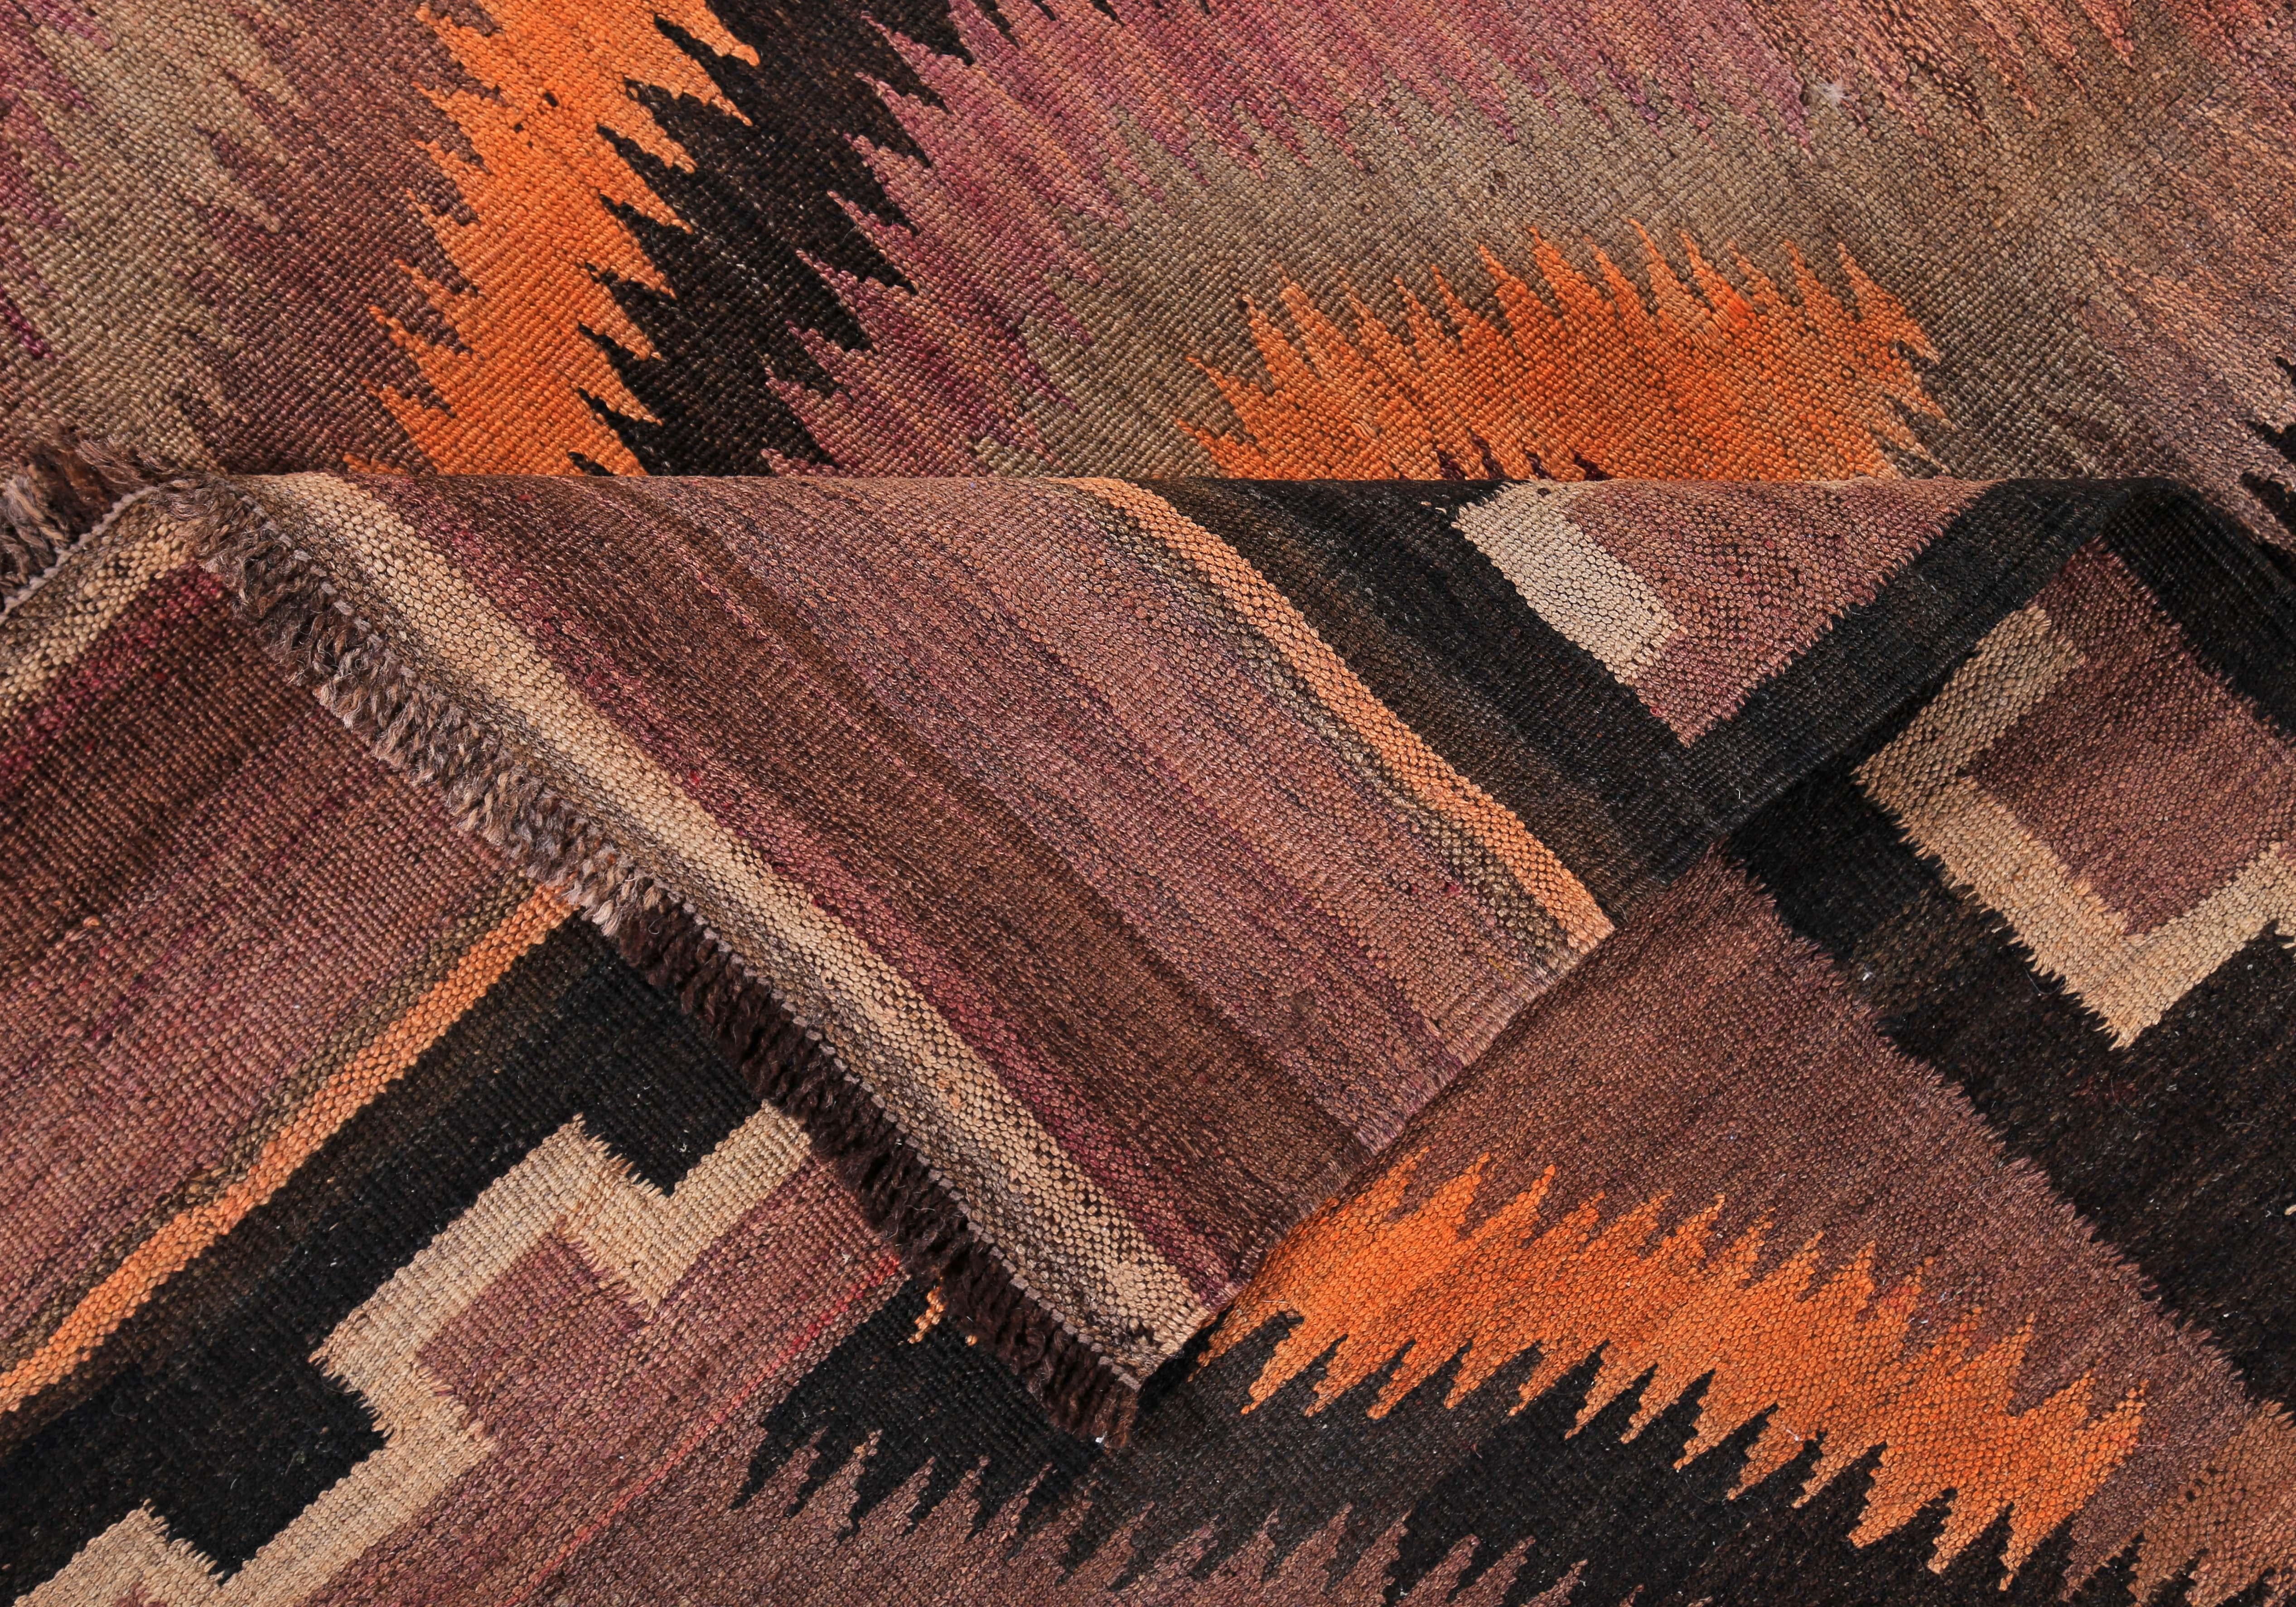 Turkish Kilim Runner Rug in Orange, Brown and Black Flat-Weave Pattern In New Condition For Sale In Dallas, TX